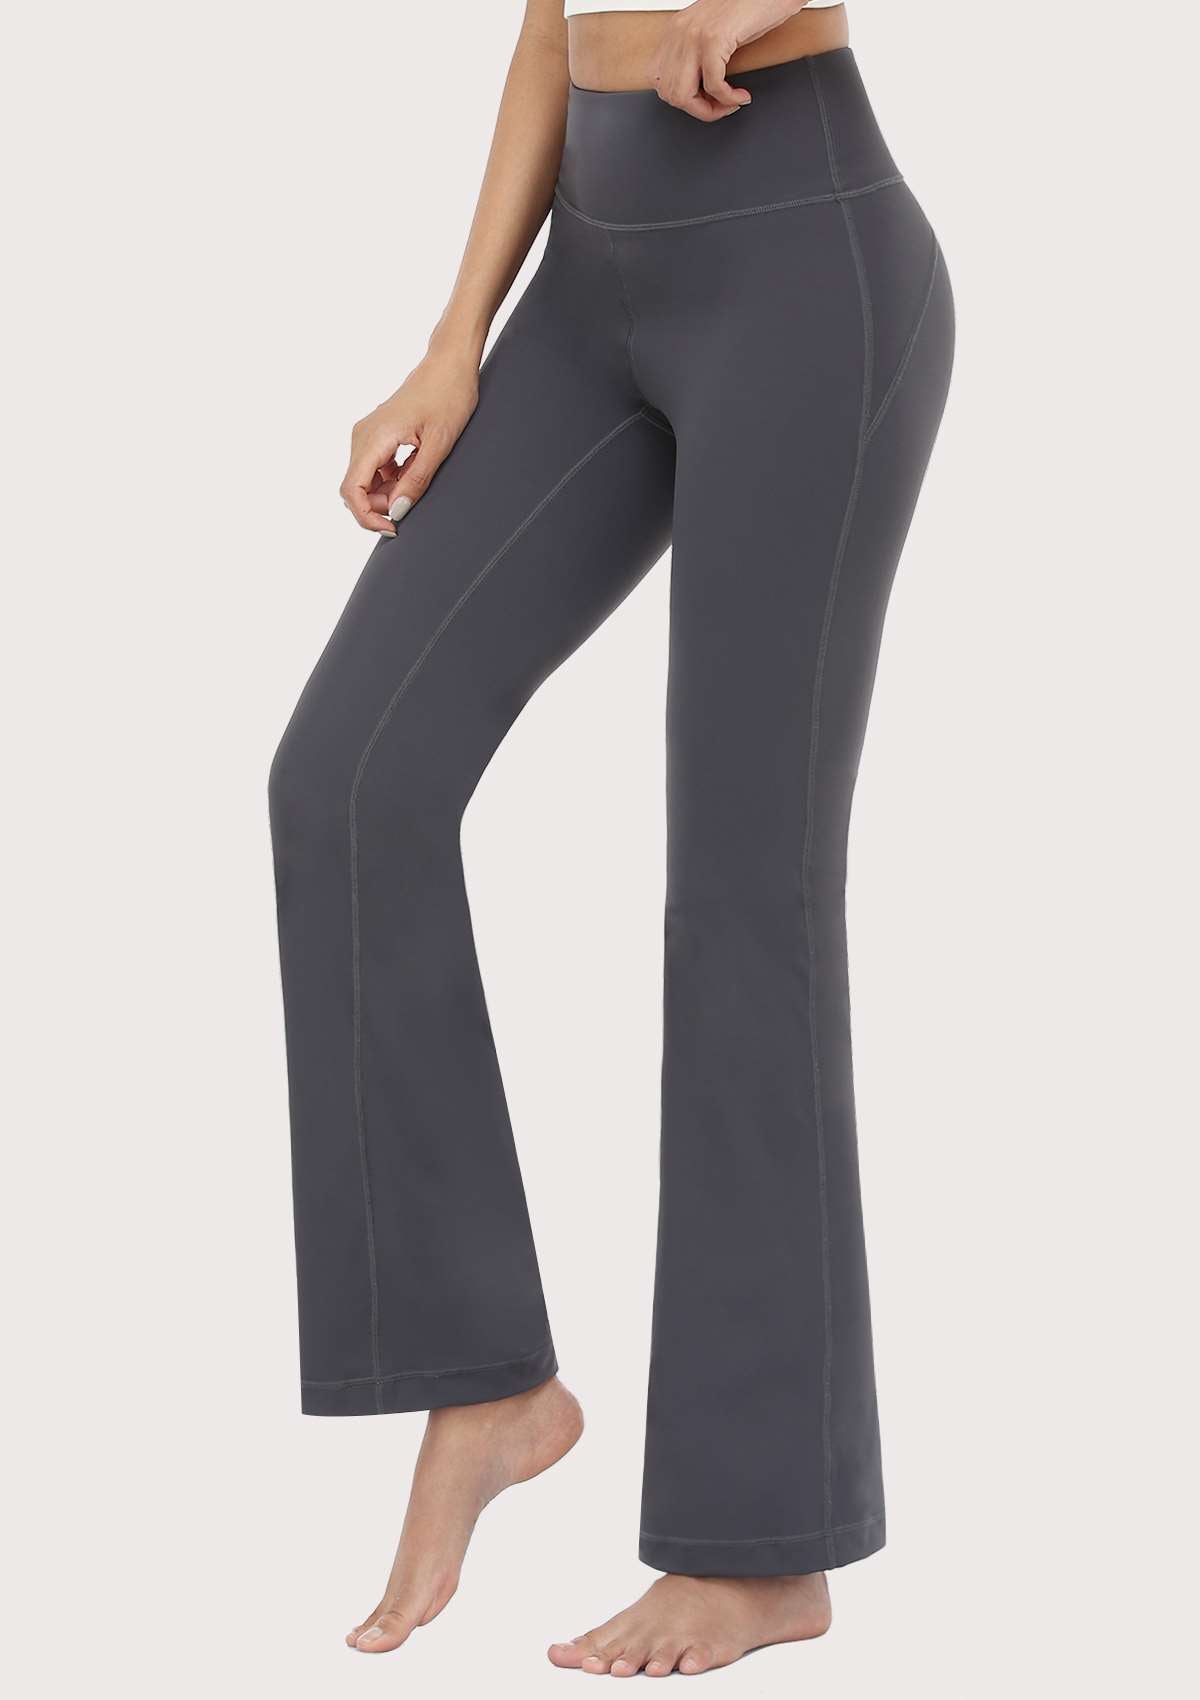 SONGFUL Smooth High Waisted Bootcut Yoga Sports Pants - XS / Dark Grey